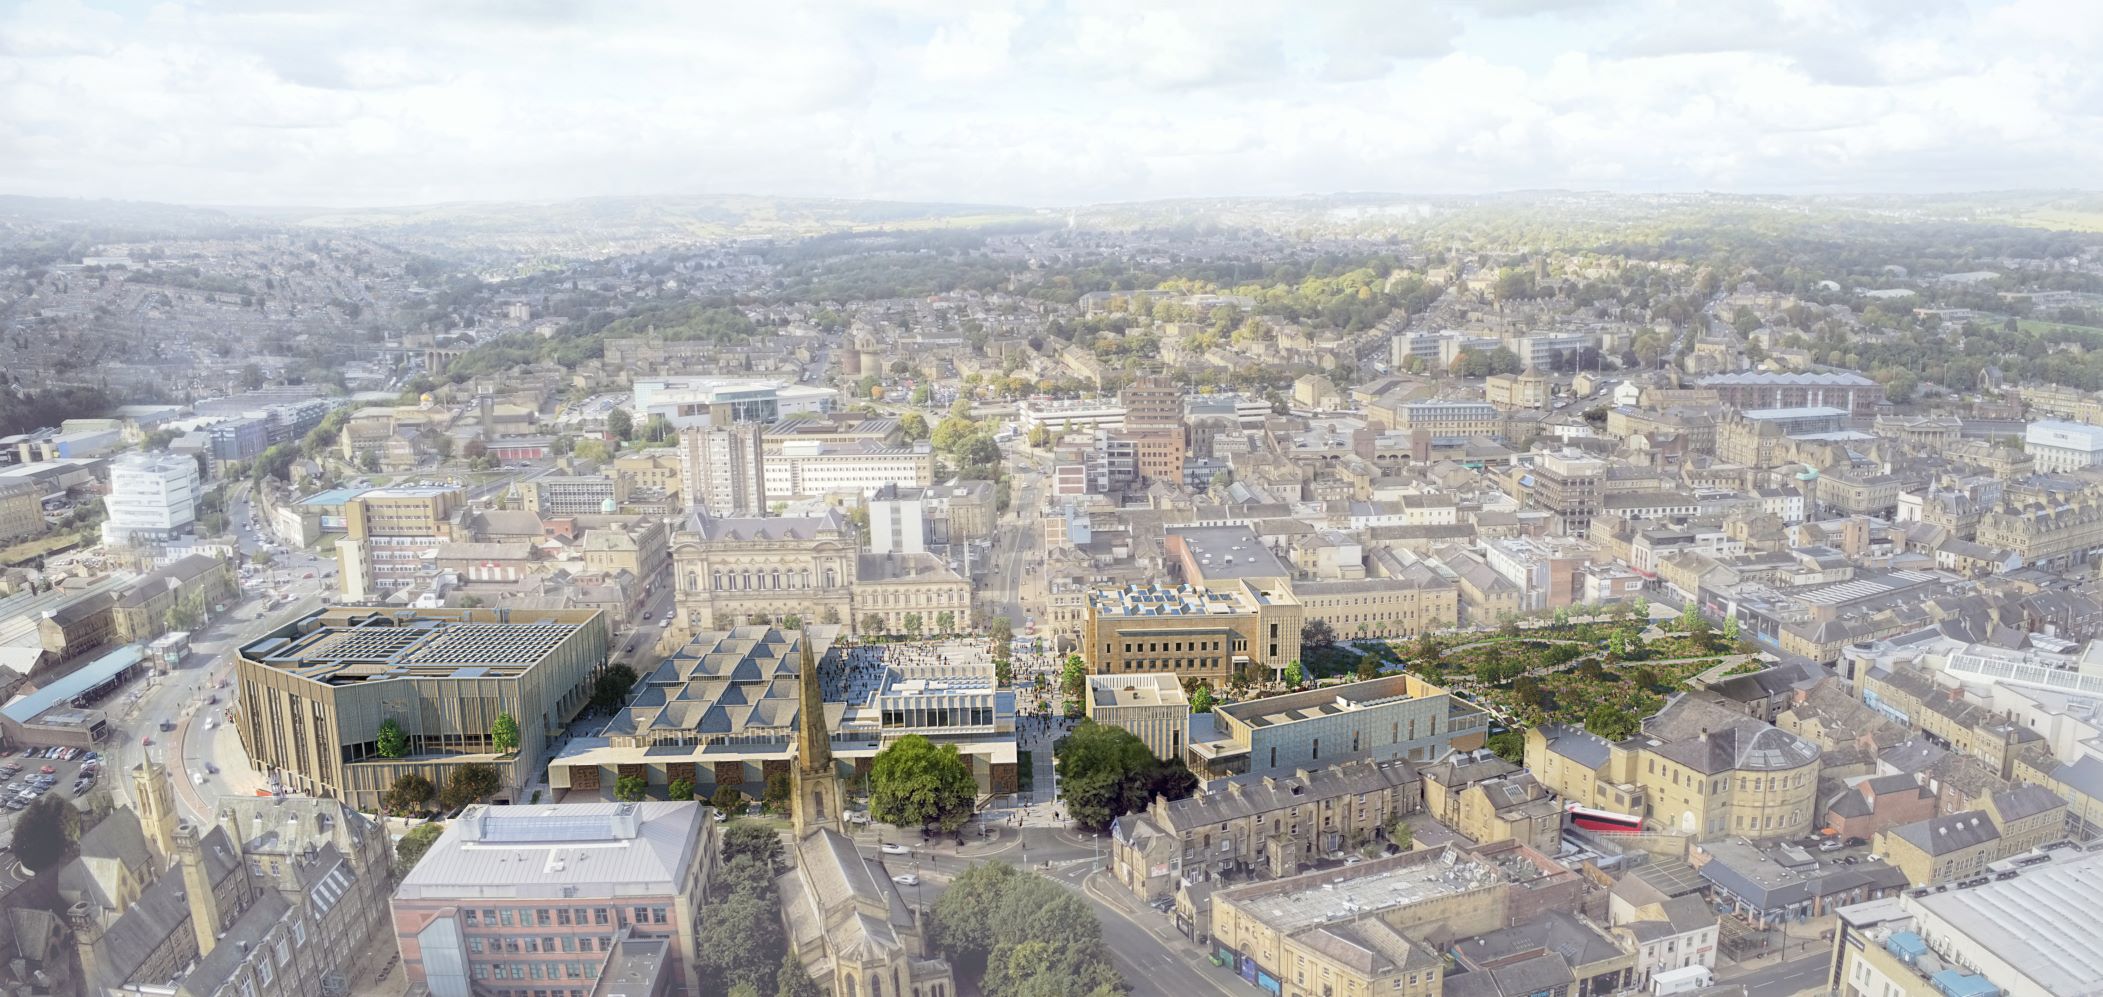 An artist's impression of new town centre development as seen from the air.